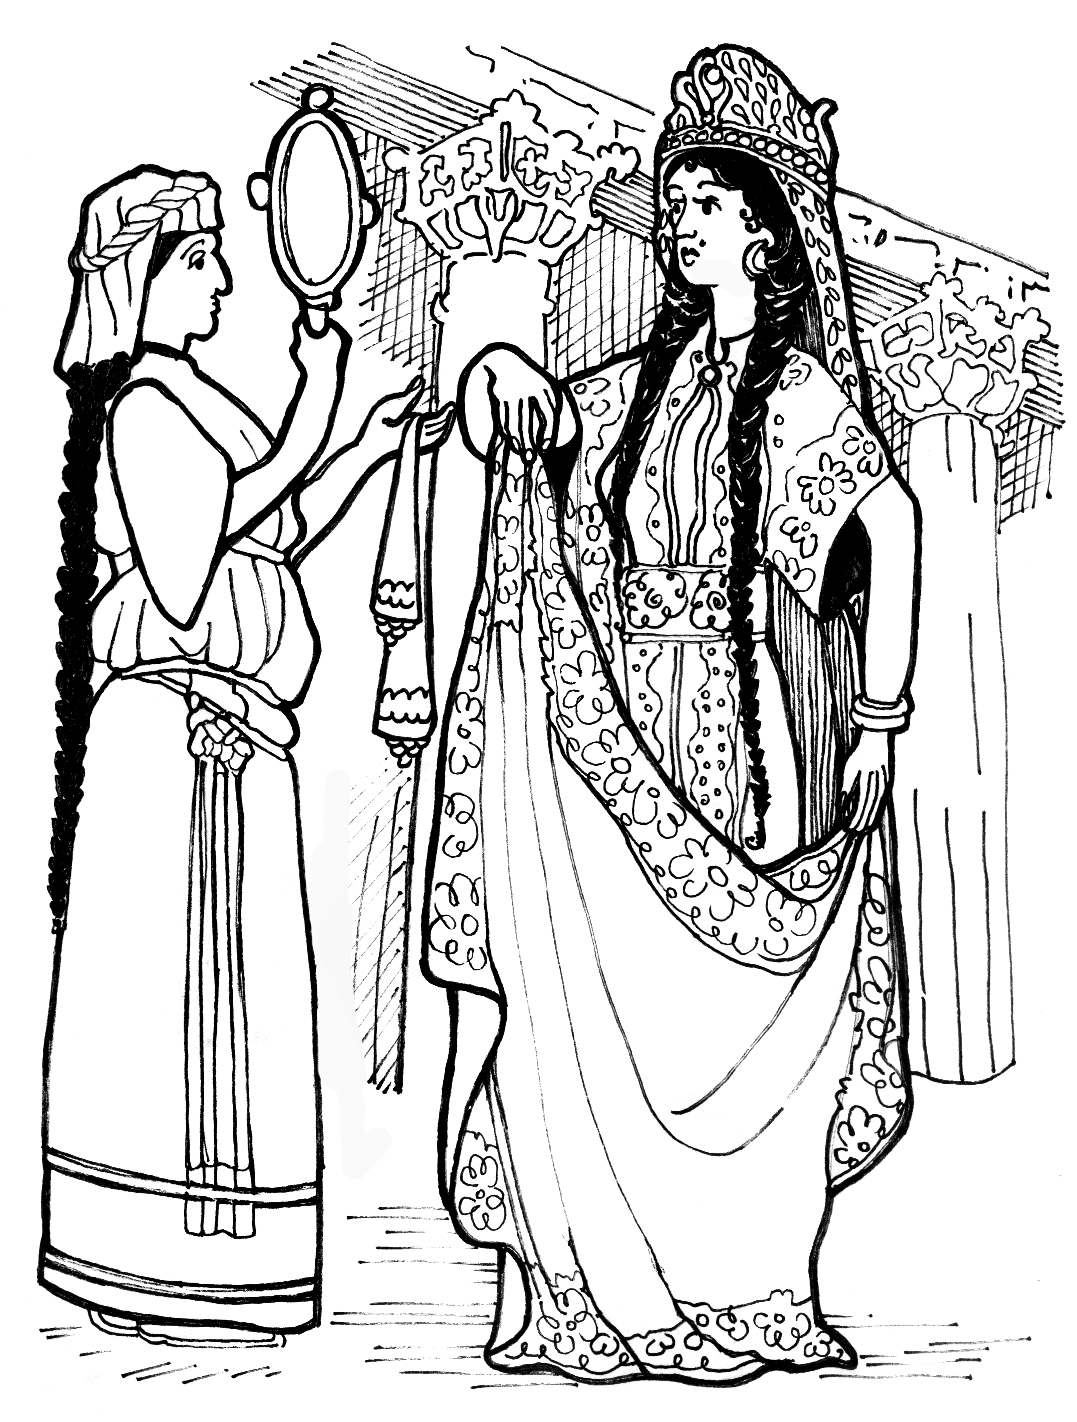 Queen Esther | Coloring Pages to Print